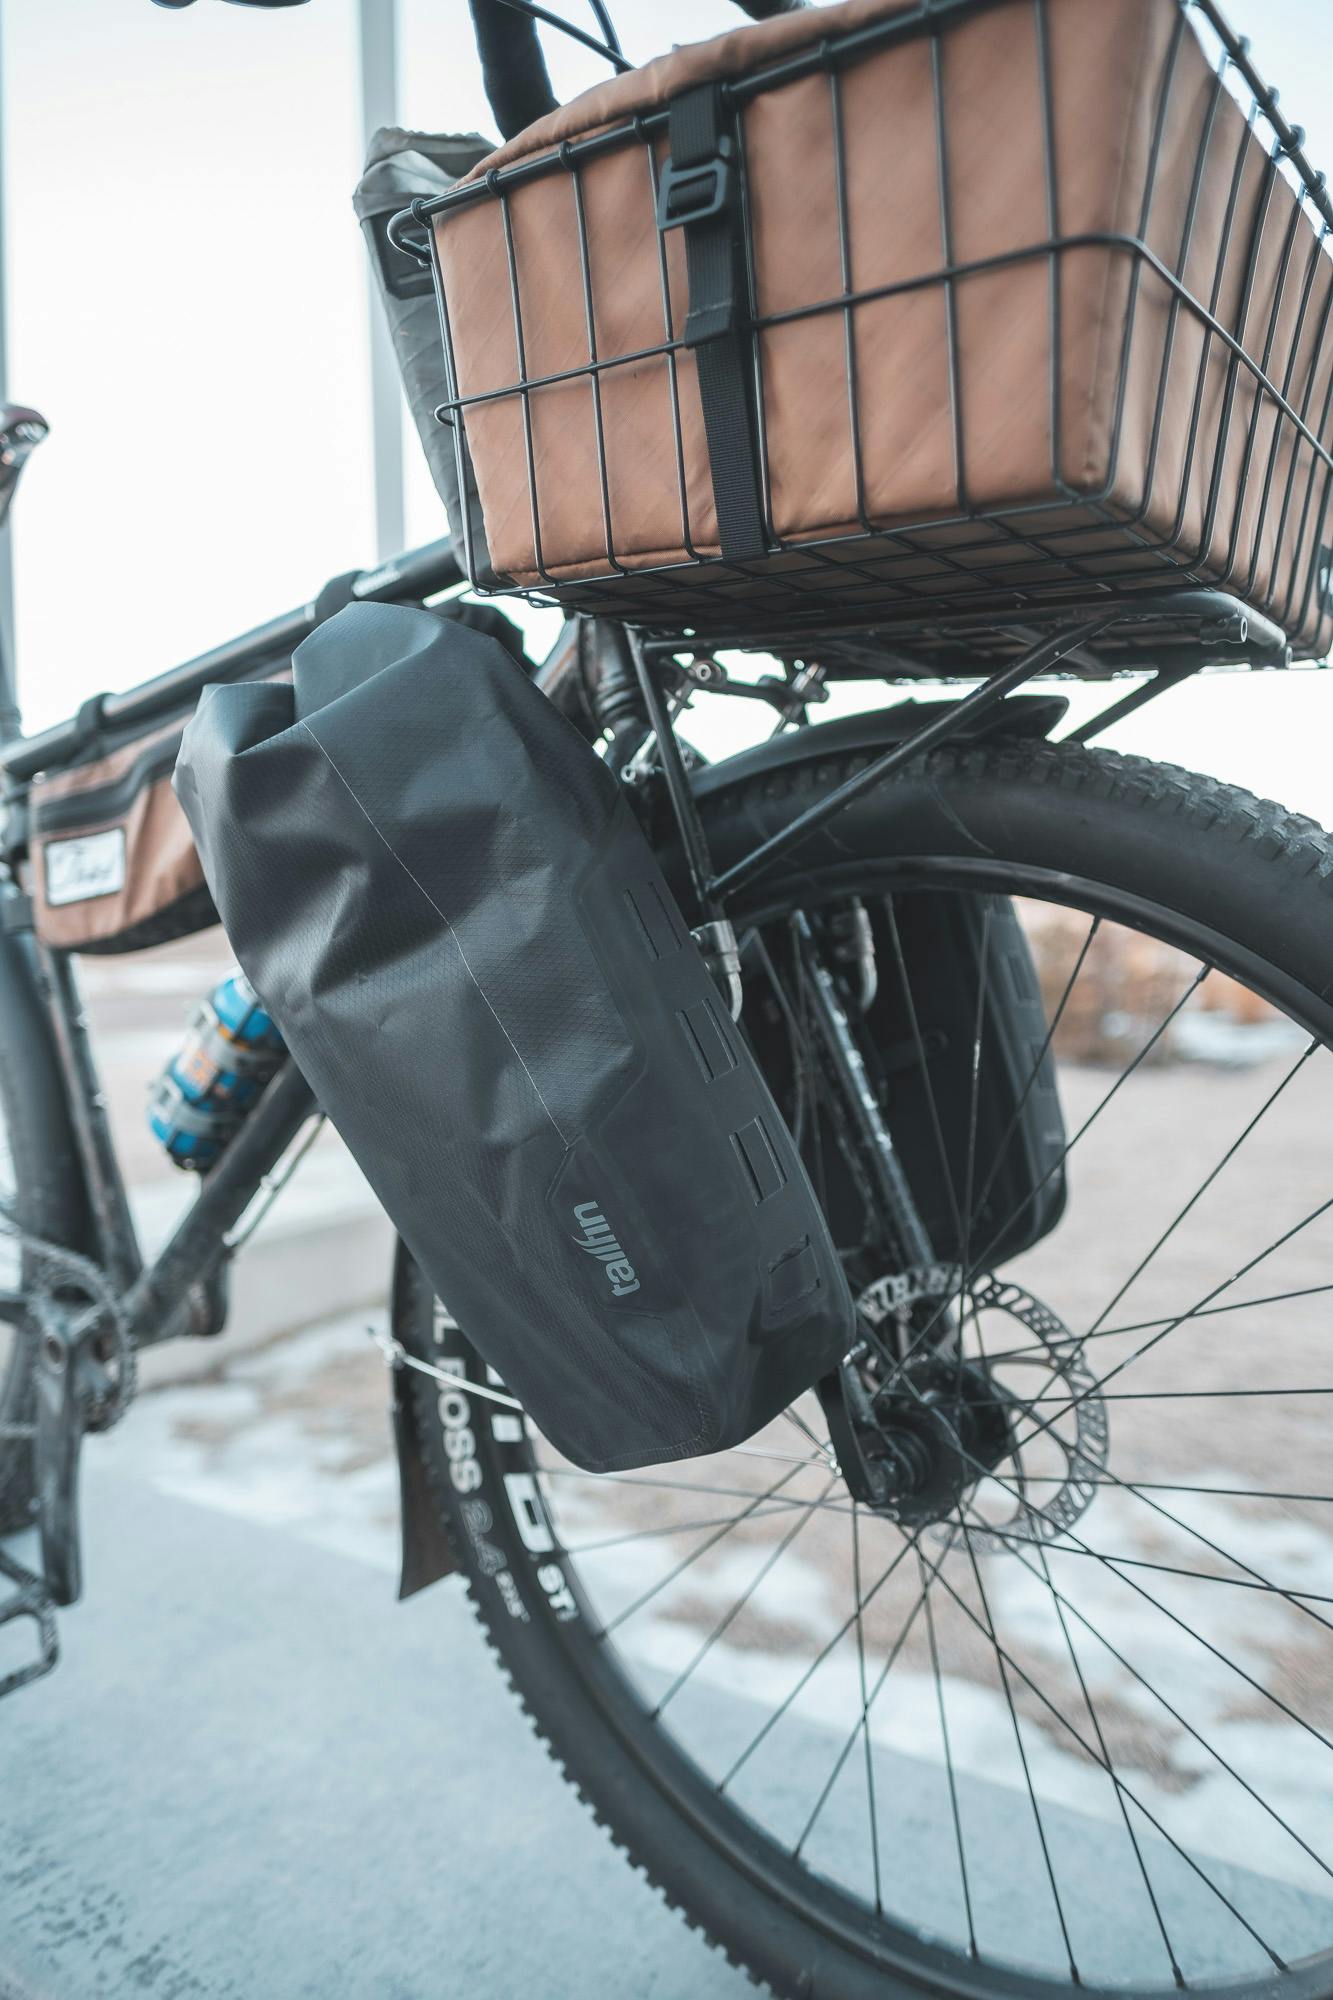 A Surly Bridge Club with Tailfin fork bags.